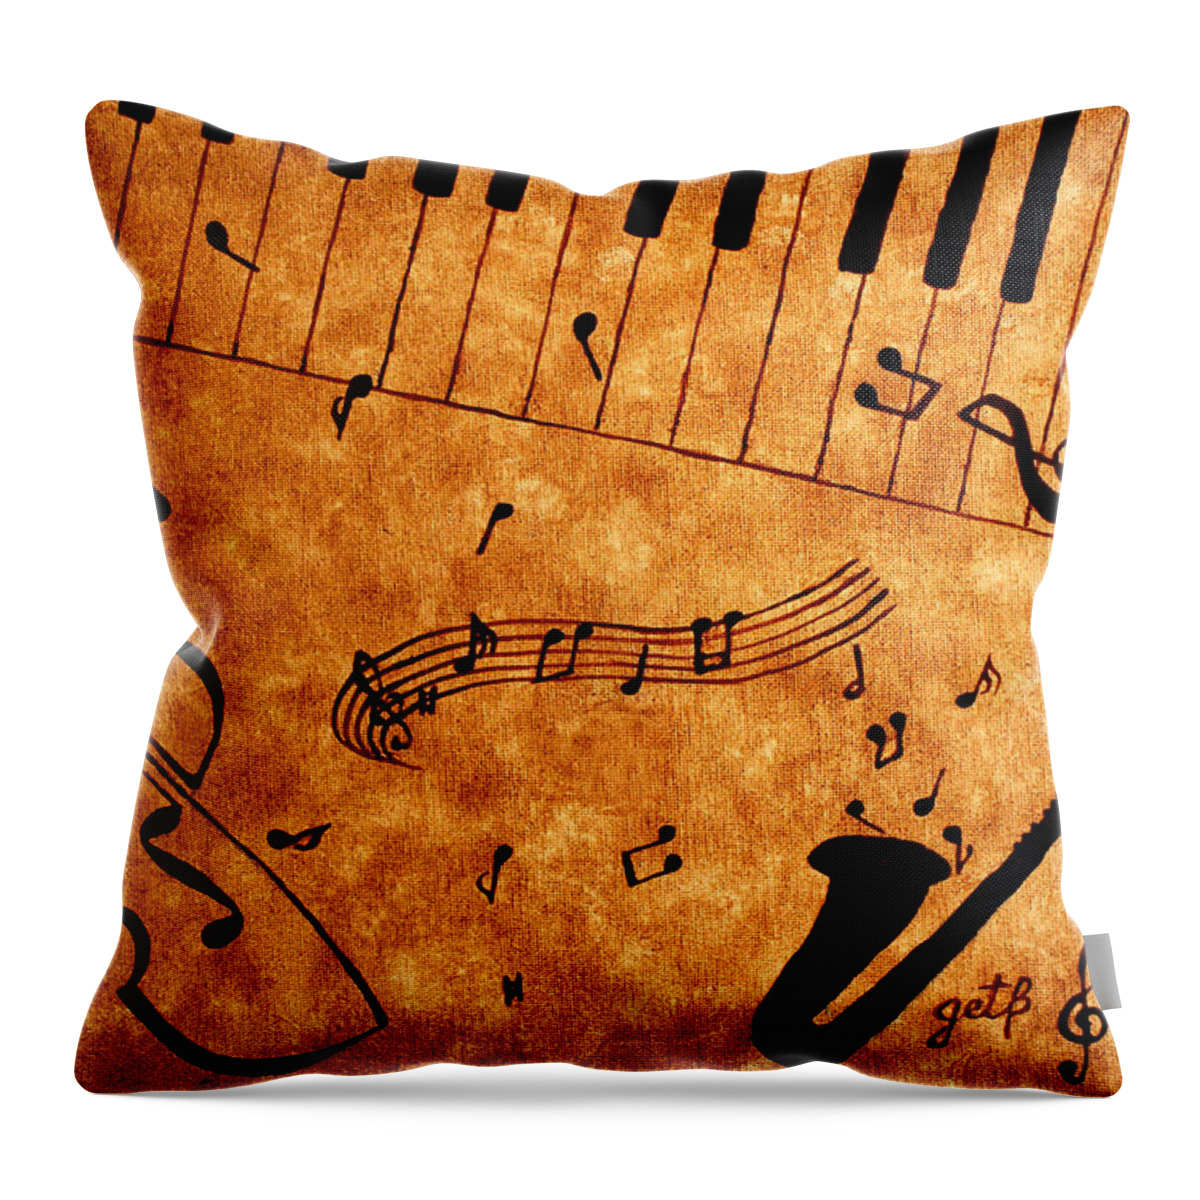 Abstract Jazz Music Throw Pillow featuring the painting Jazz Music Coffee Painting by Georgeta Blanaru